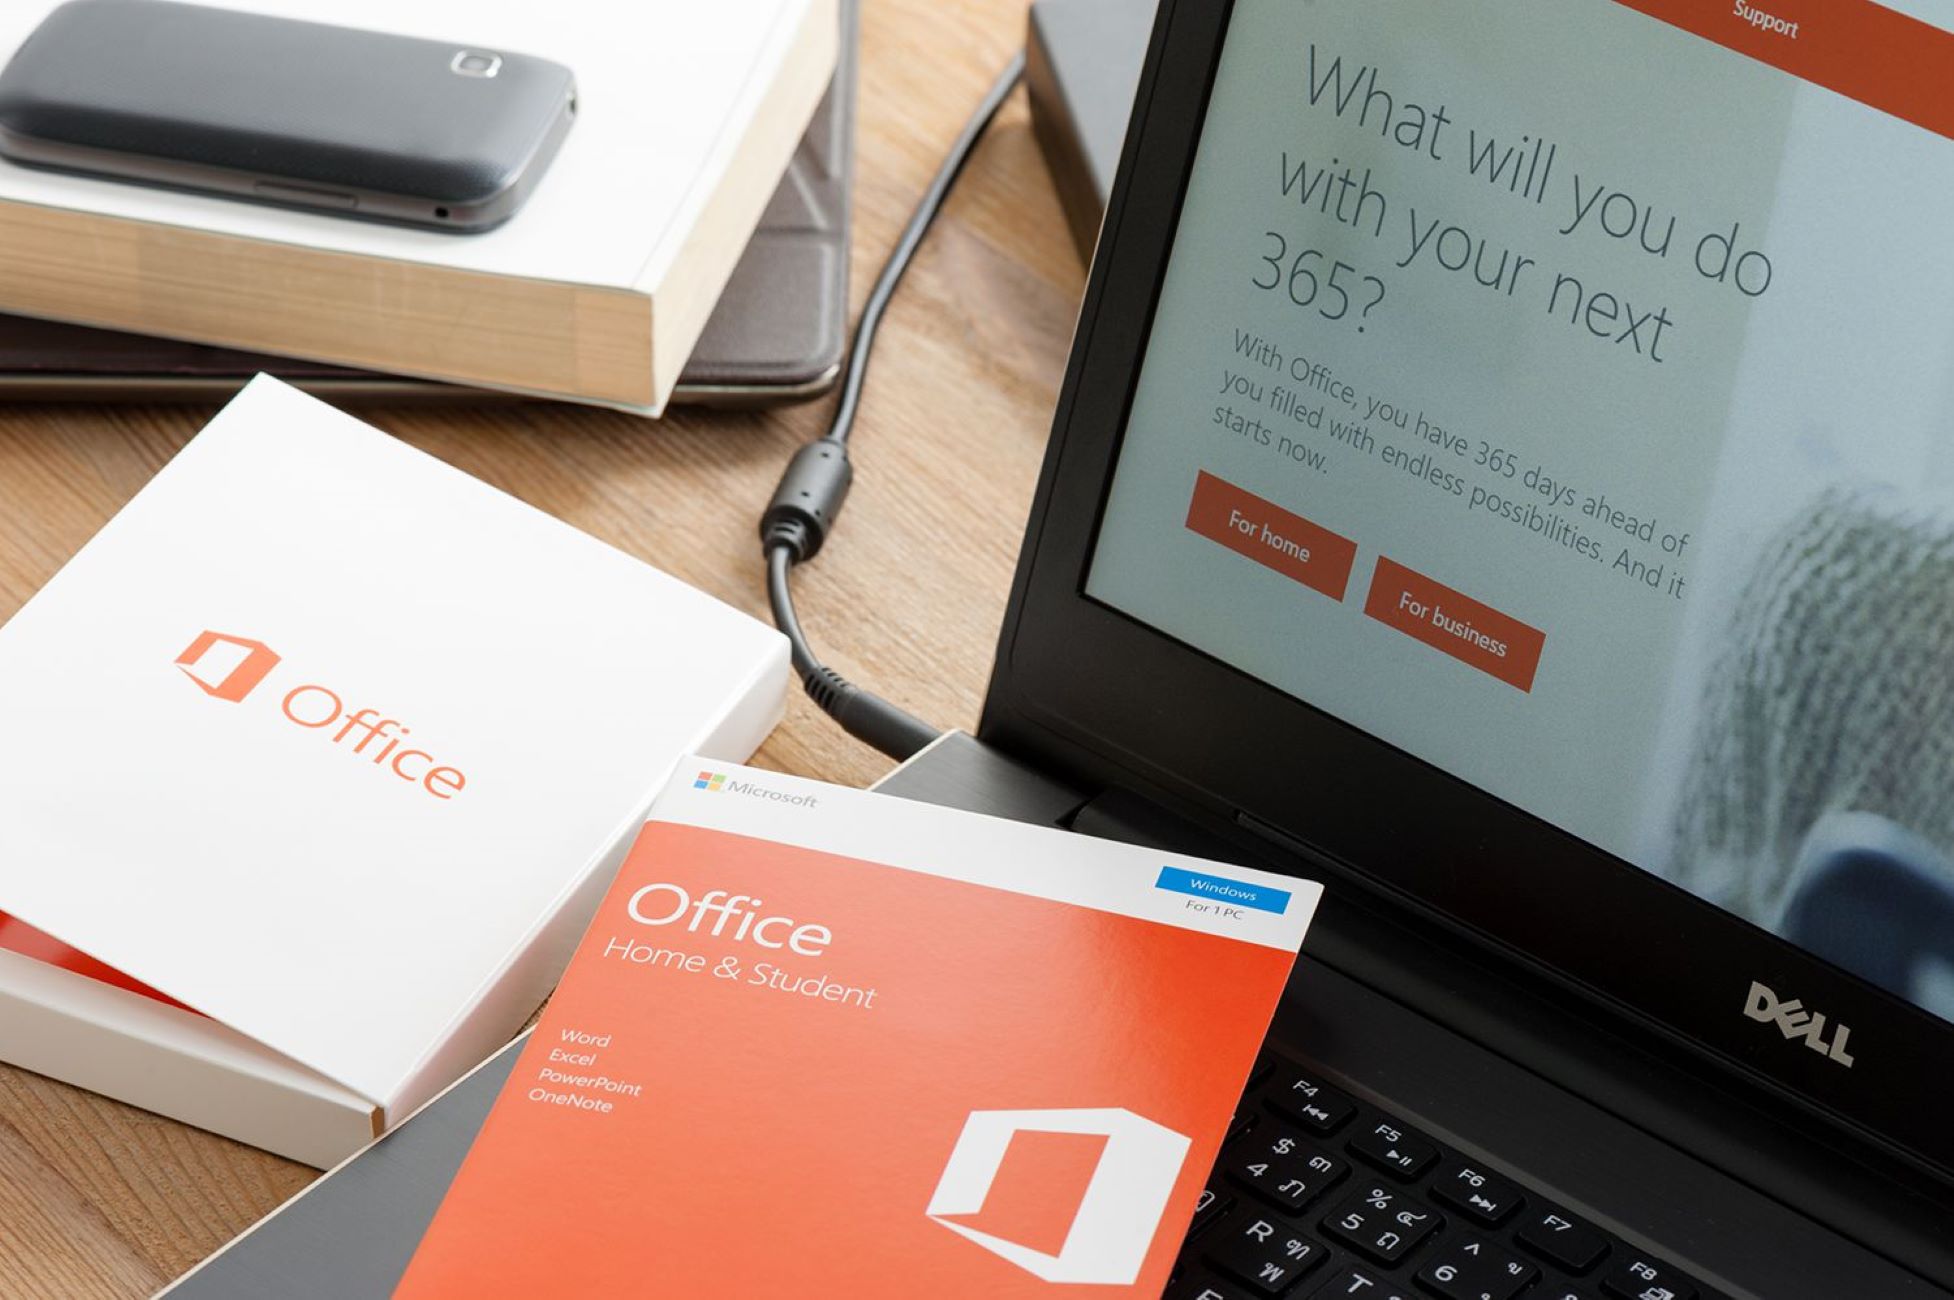 Save Big With Microsoft Office: Get It For Life At $35!